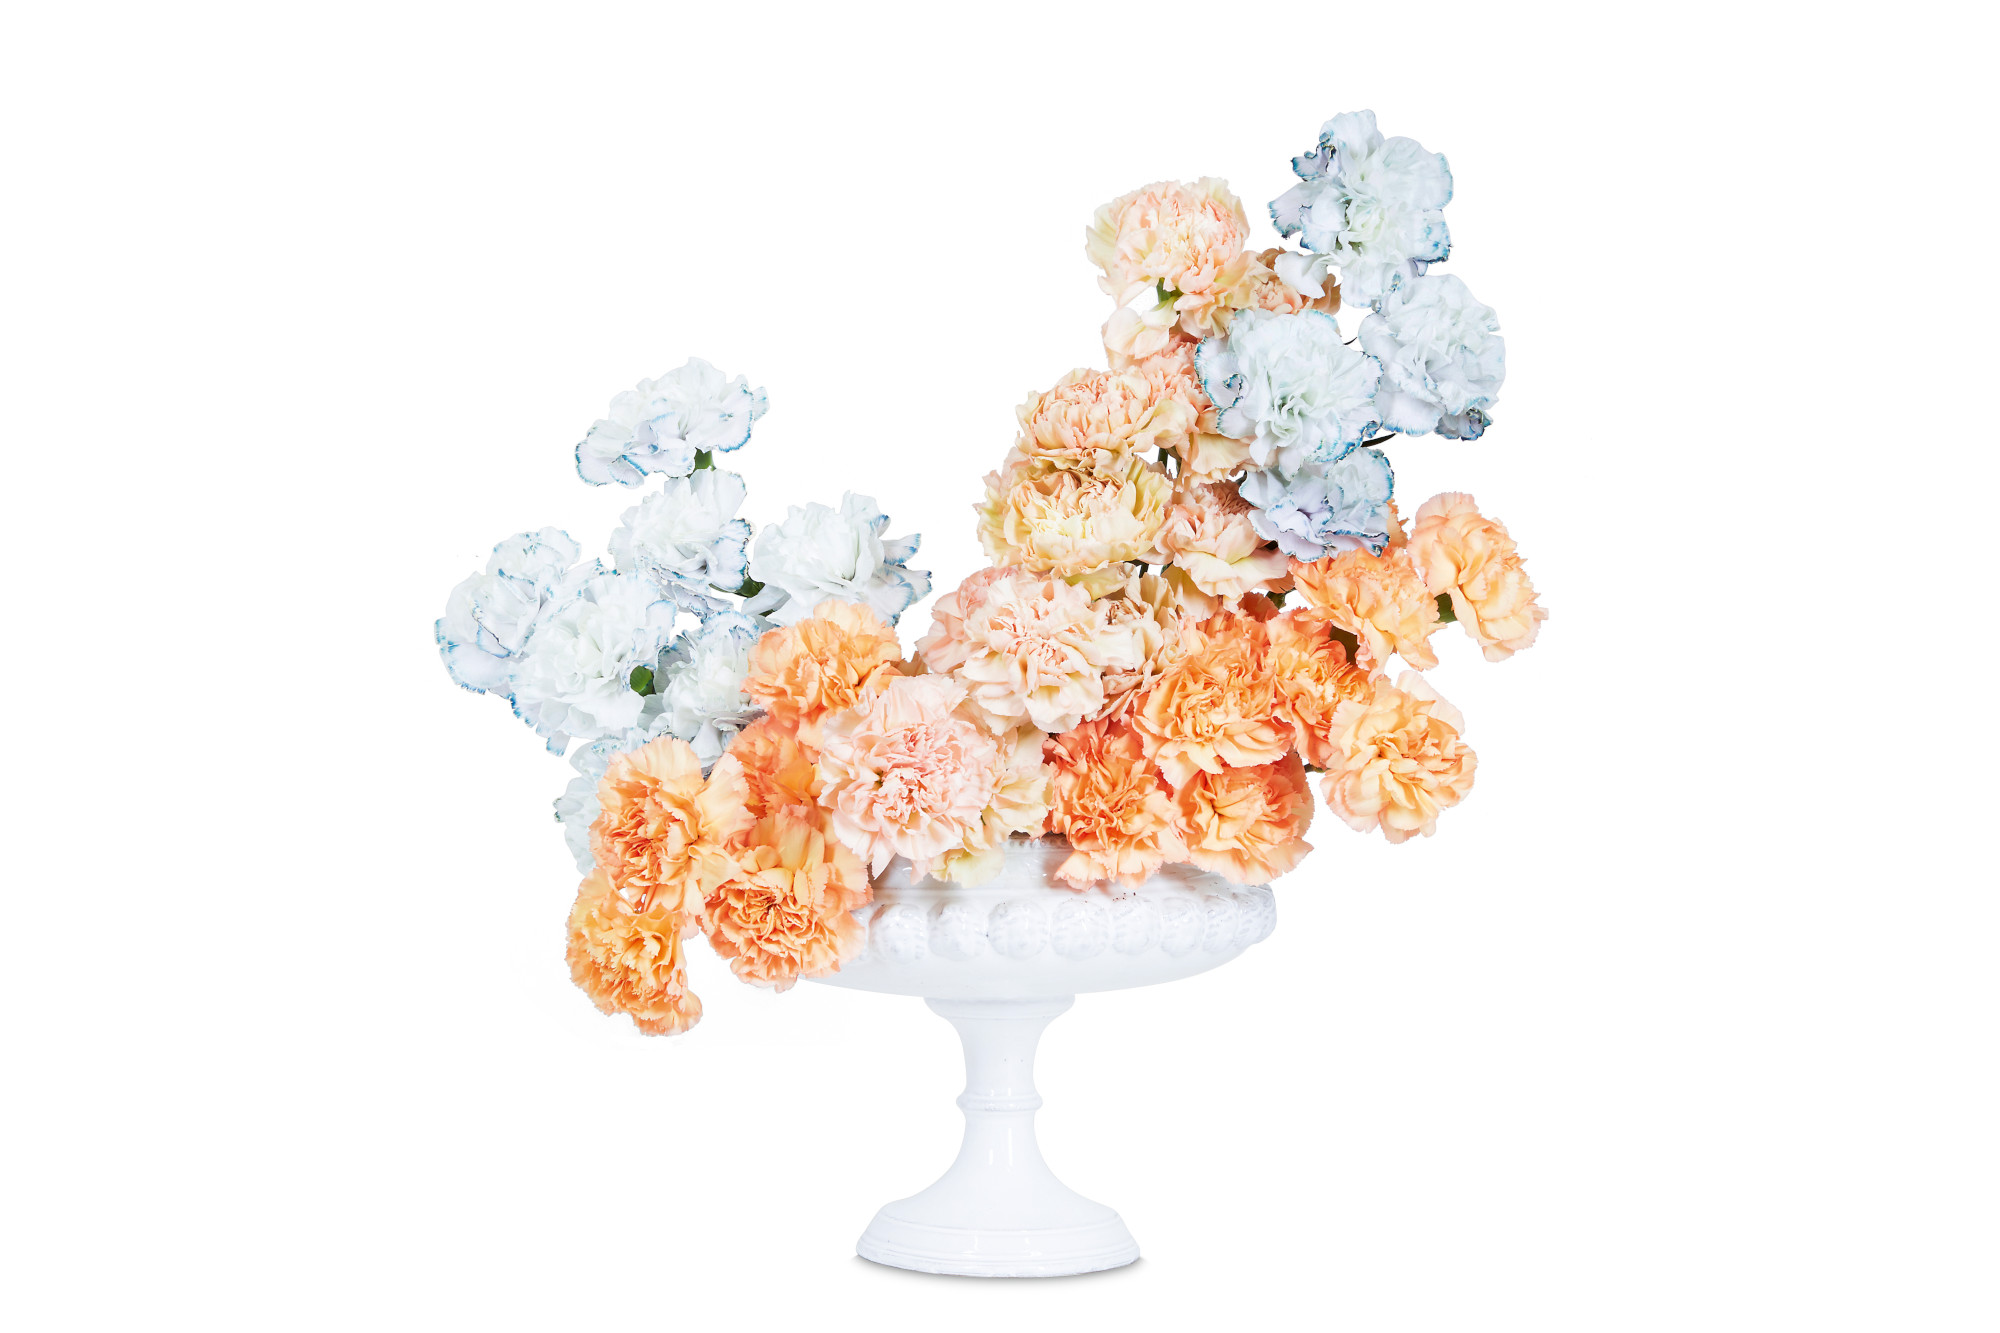 A complementary Peach and pale blue Carnation arrangement from Flower Color Theory. 'When creating a composition with only one type of flower, focus on color variation and the desired shape of the arrangement,' Darroch and Michael Putnam advise.